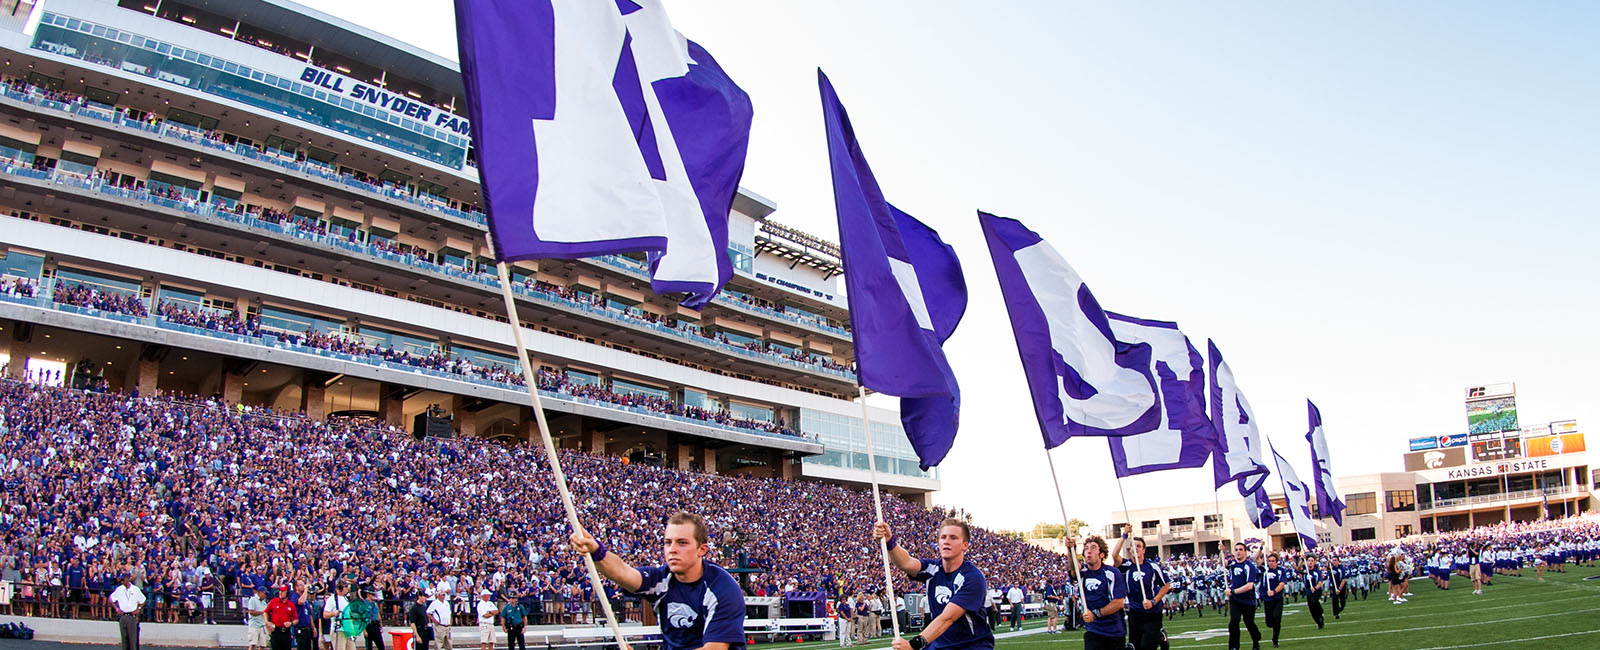 K-State flags